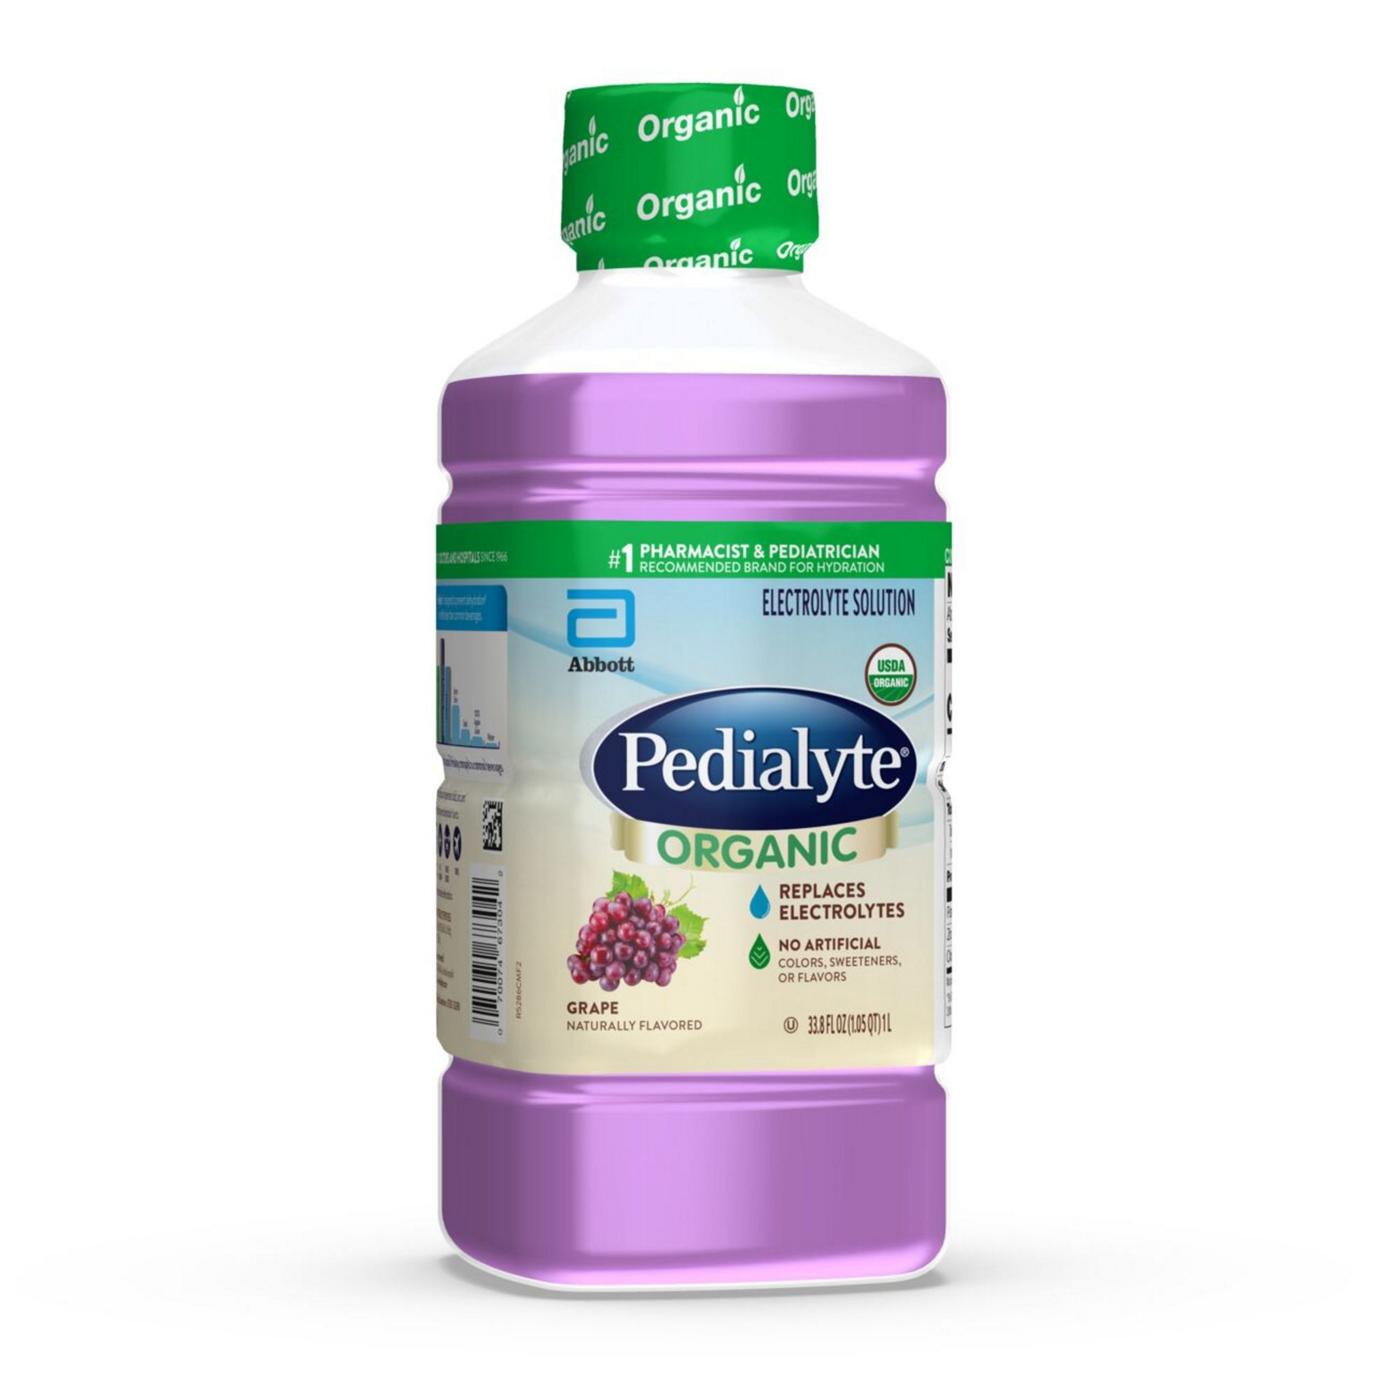 Pedialyte Organic Electrolyte Solution - Grape; image 4 of 9